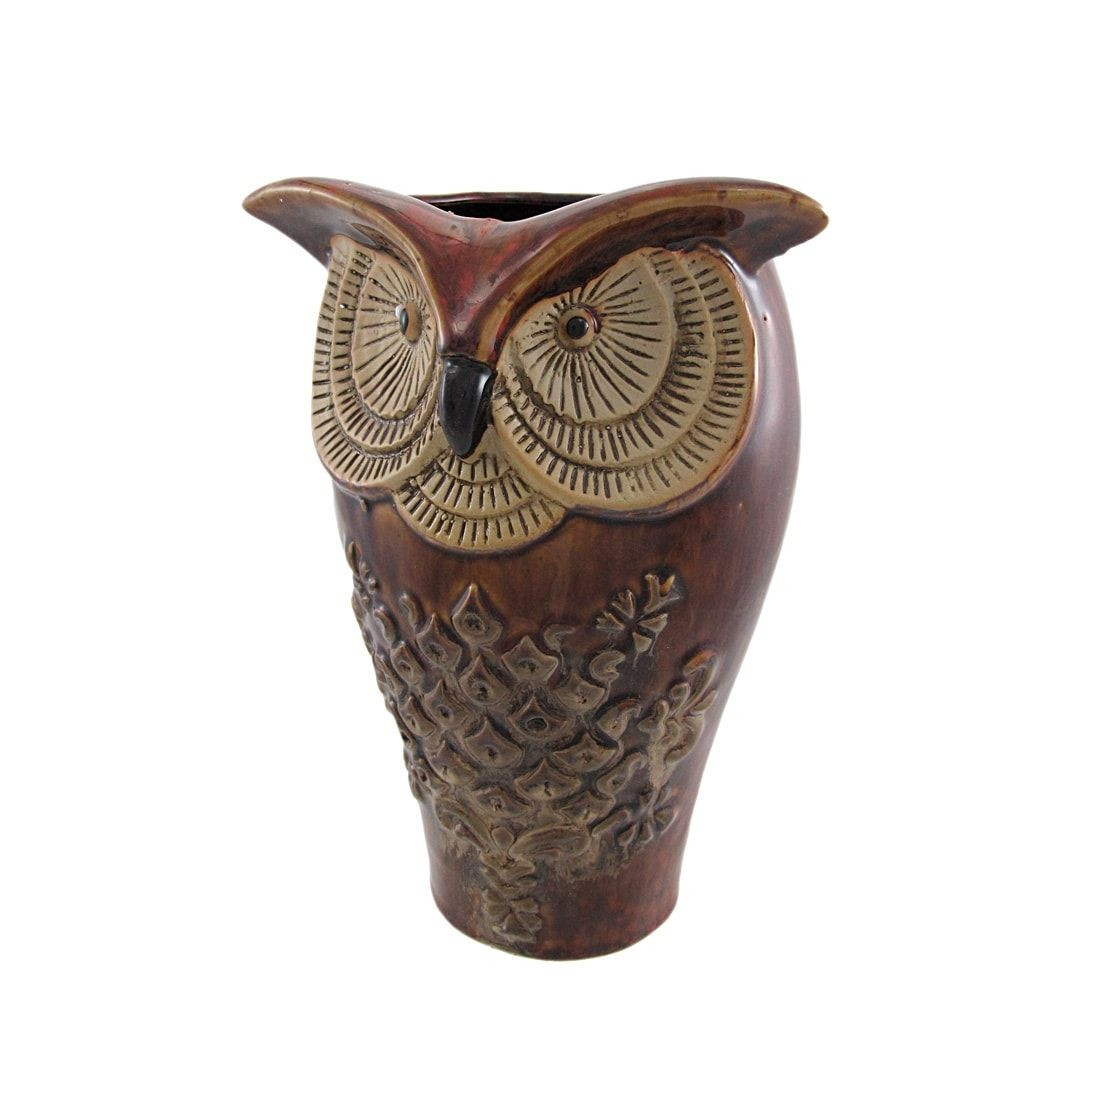 25 Unique Flower Vase Brass 2024 free download flower vase brass of 9 inch tall ceramic owl flower vase brown flower vases outlet inside 9 inch tall ceramic owl flower vase brown flower vases outlet store and products